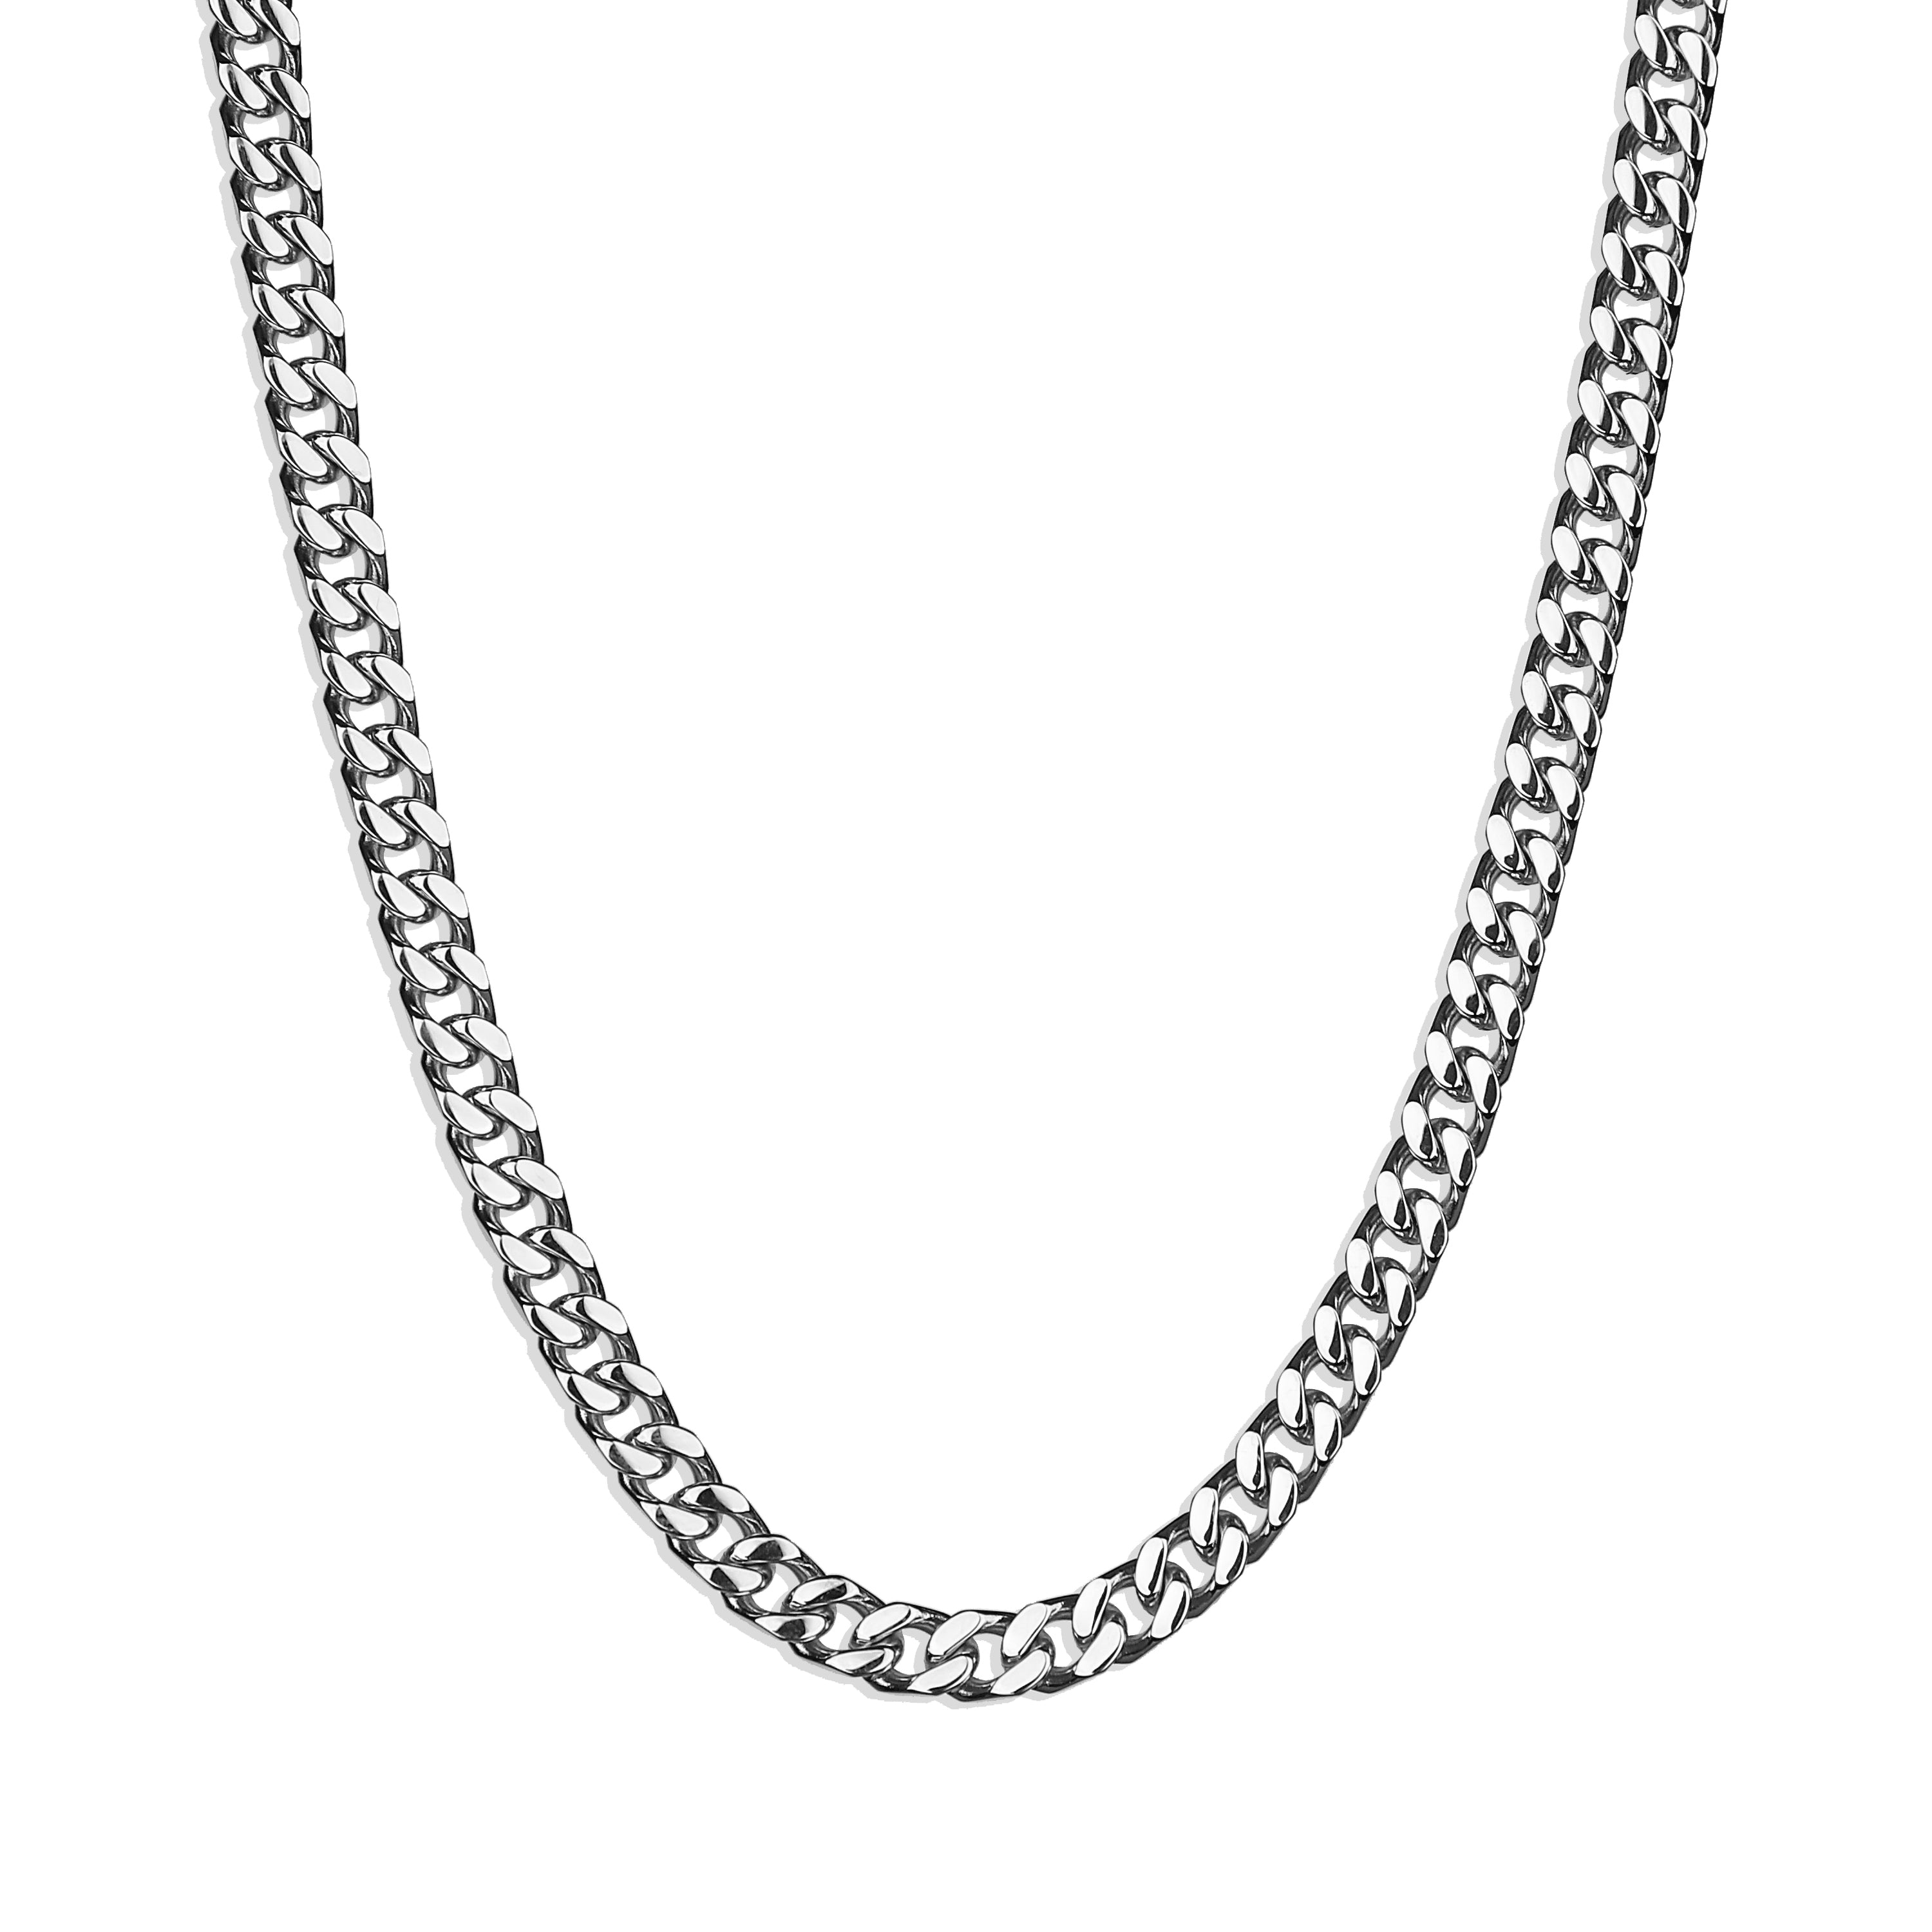 Curb Chain Necklace - Silver 6mm